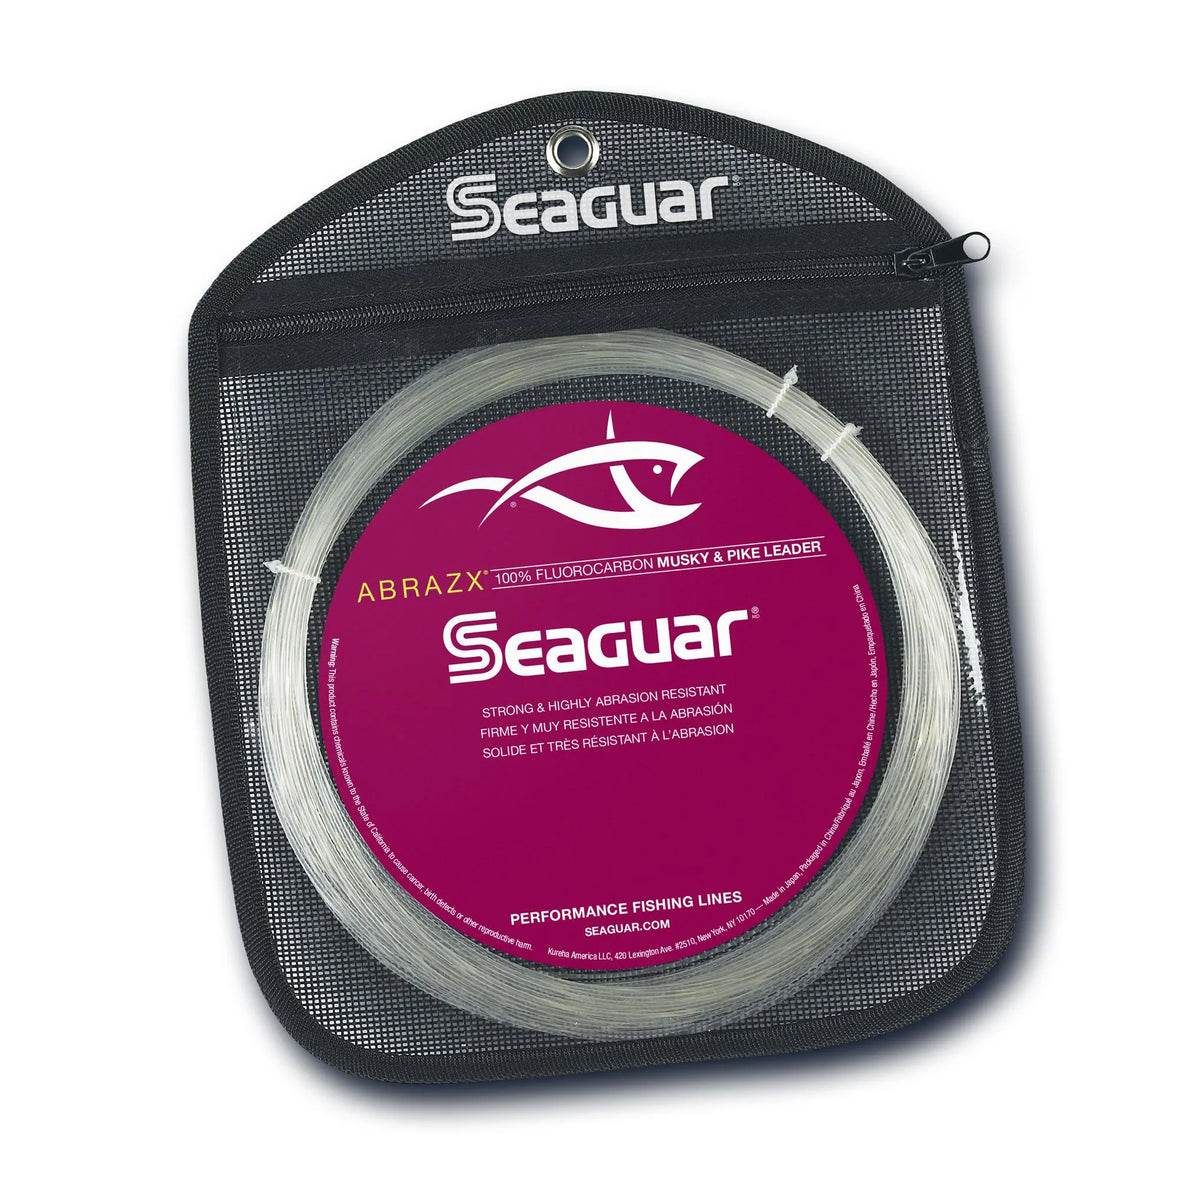 Seaguar AbrazX Musky & Pike Leader Coil – Outdoor America